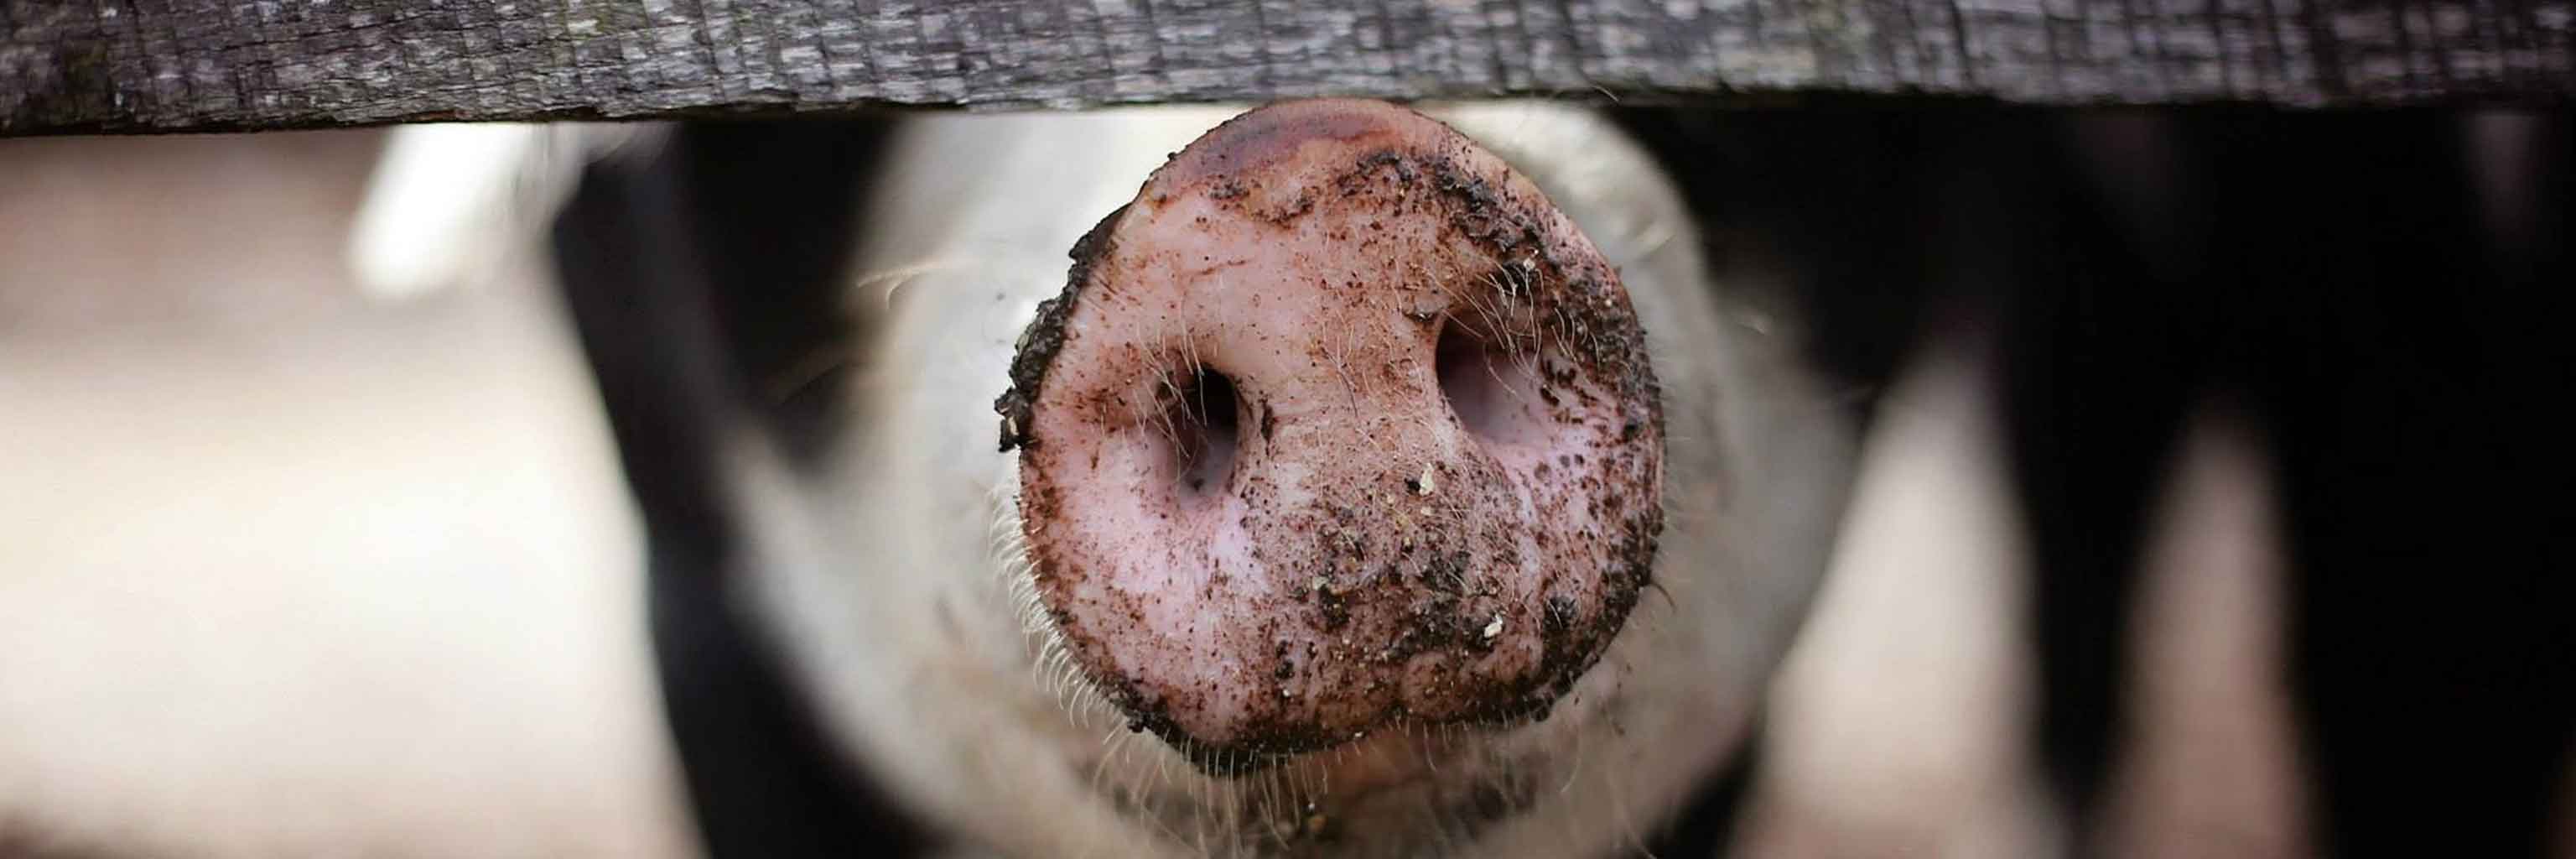 Pig snout breaking through a wood fence